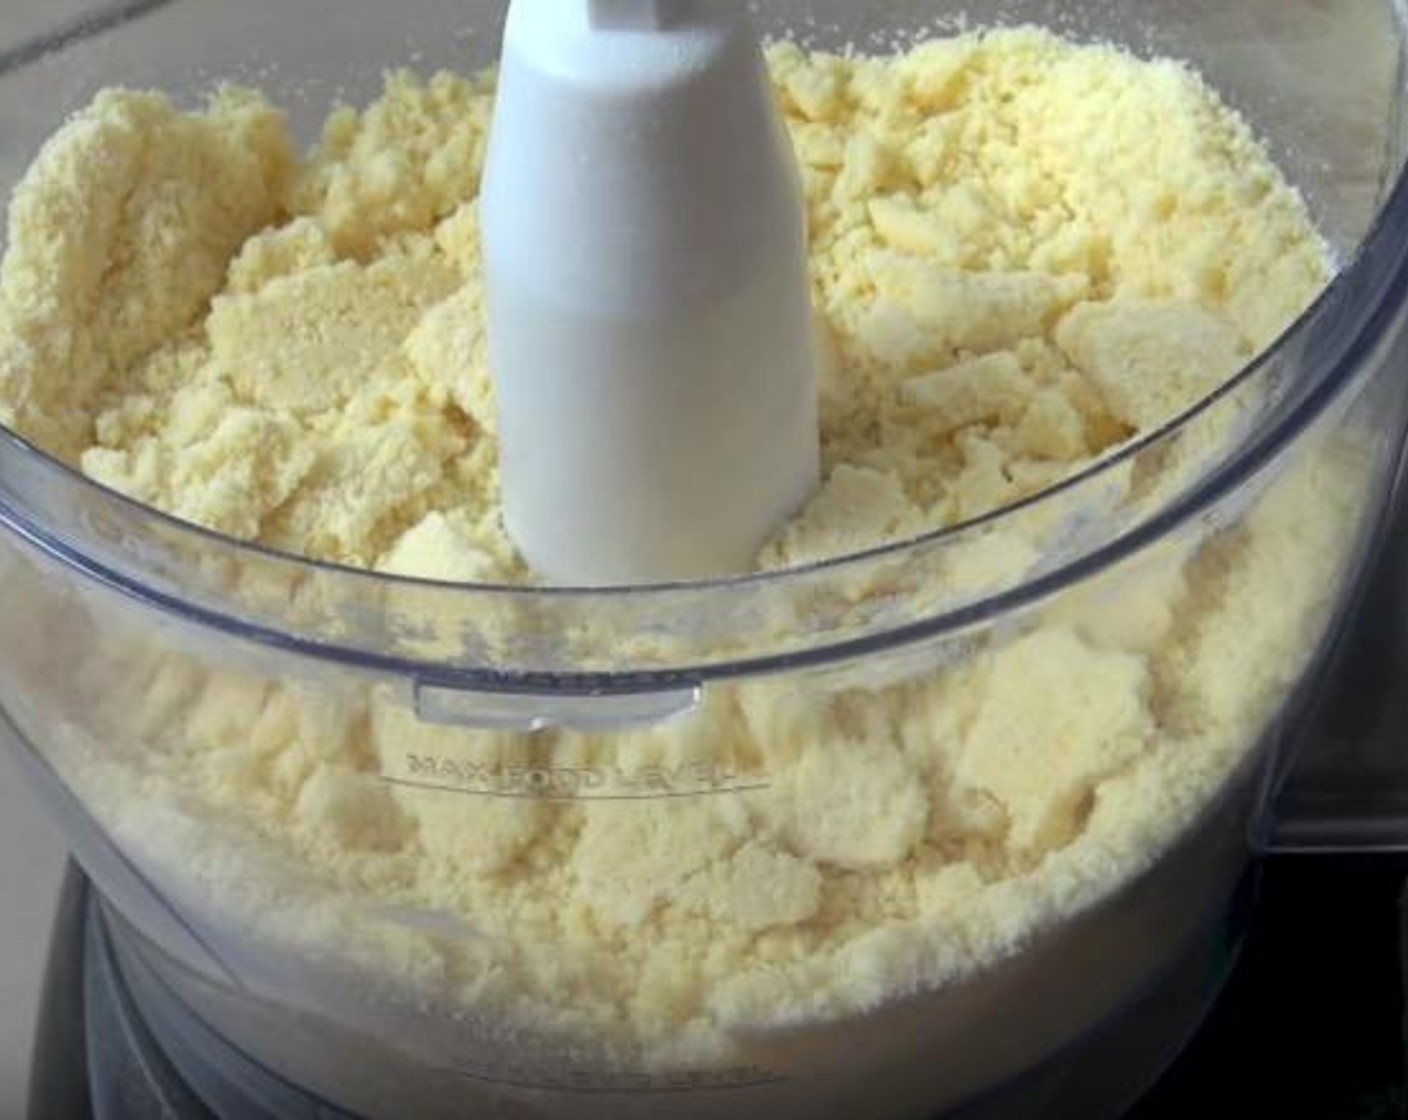 step 1 In a food processor, add All-Purpose Flour (1 3/4 cups) and Butter (2/3 cup). Process until mixture has the appearance of fine breadcrumbs.